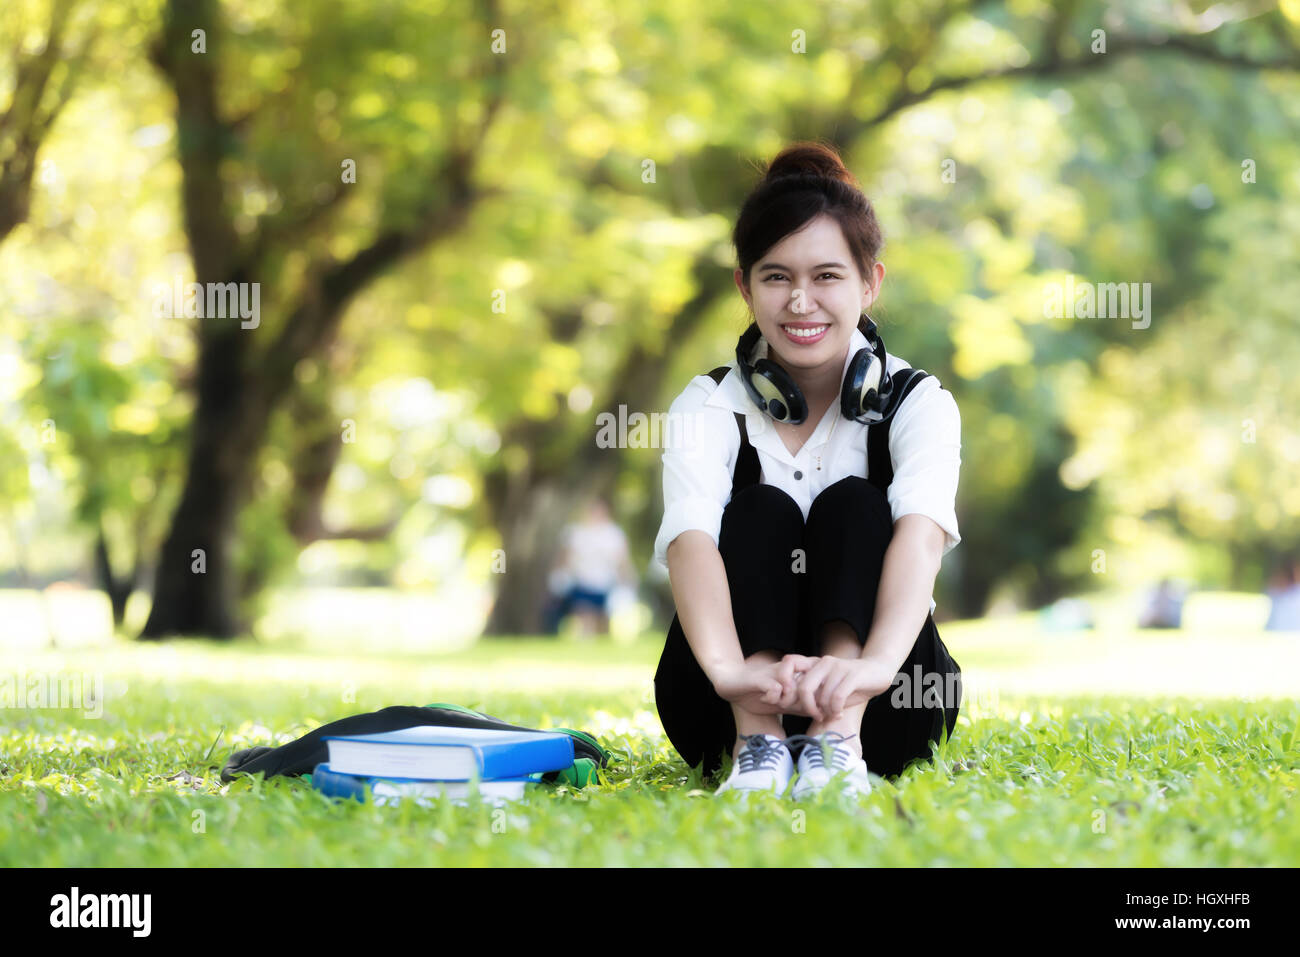 Asian female student girl outside in park listening to music on headphones while studying Stock Photo